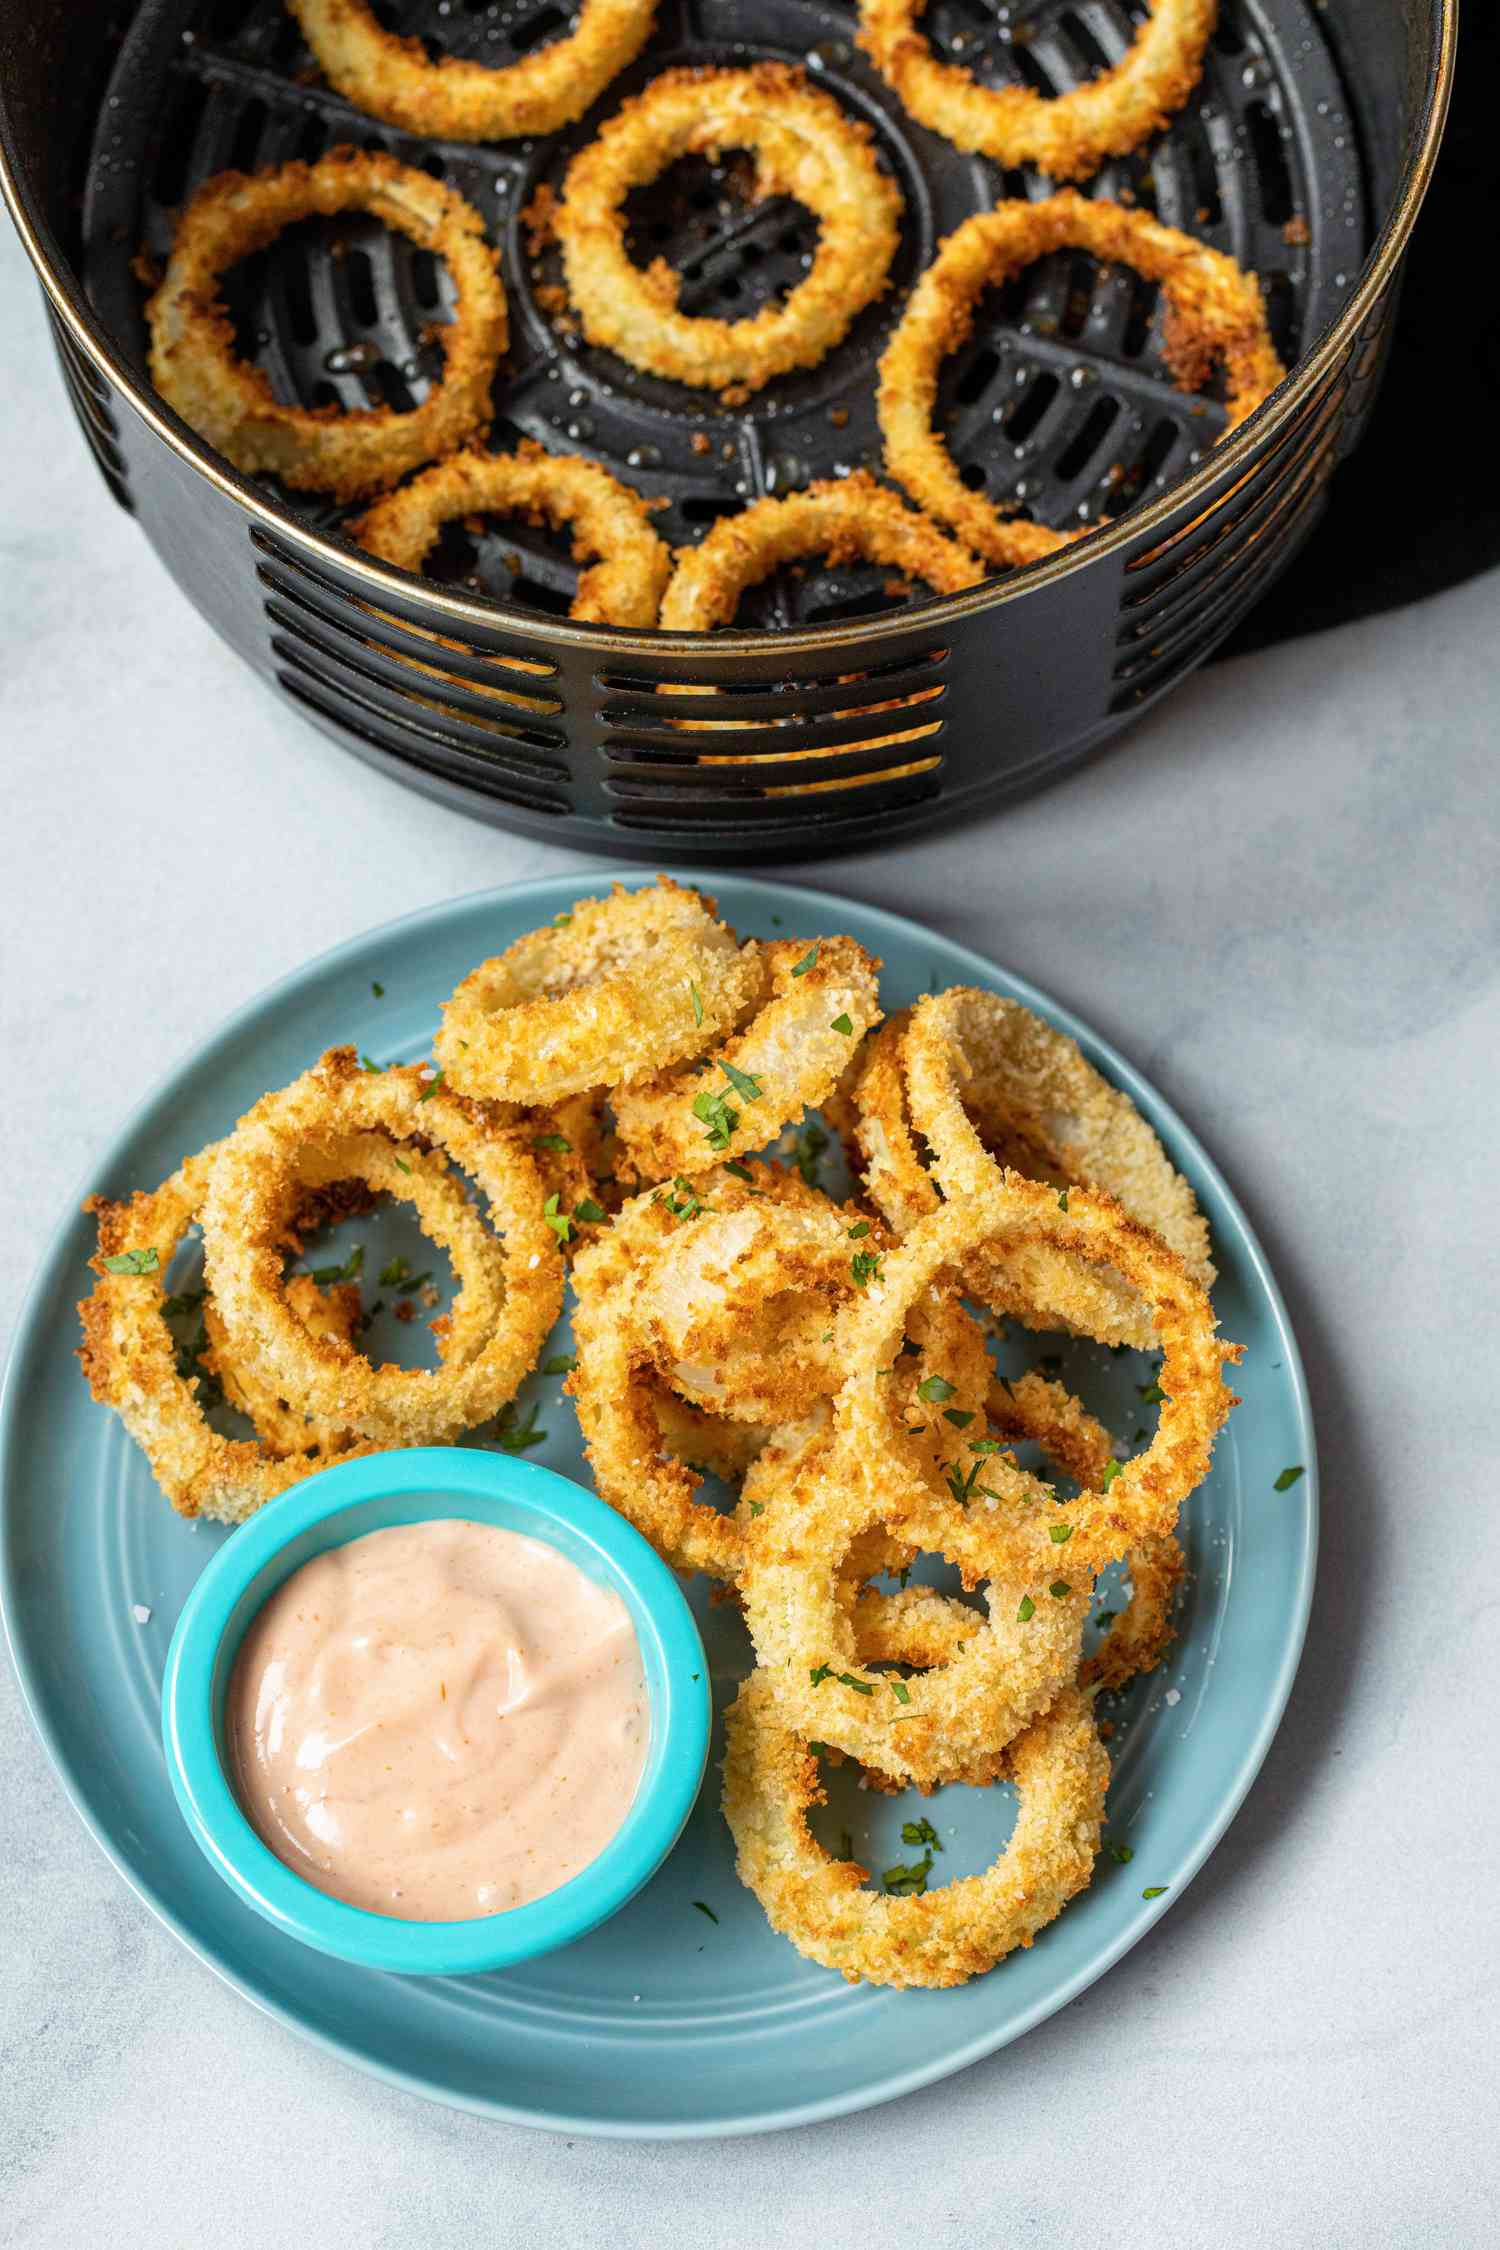 How to reheat onion rings after being on the fridge - Quora